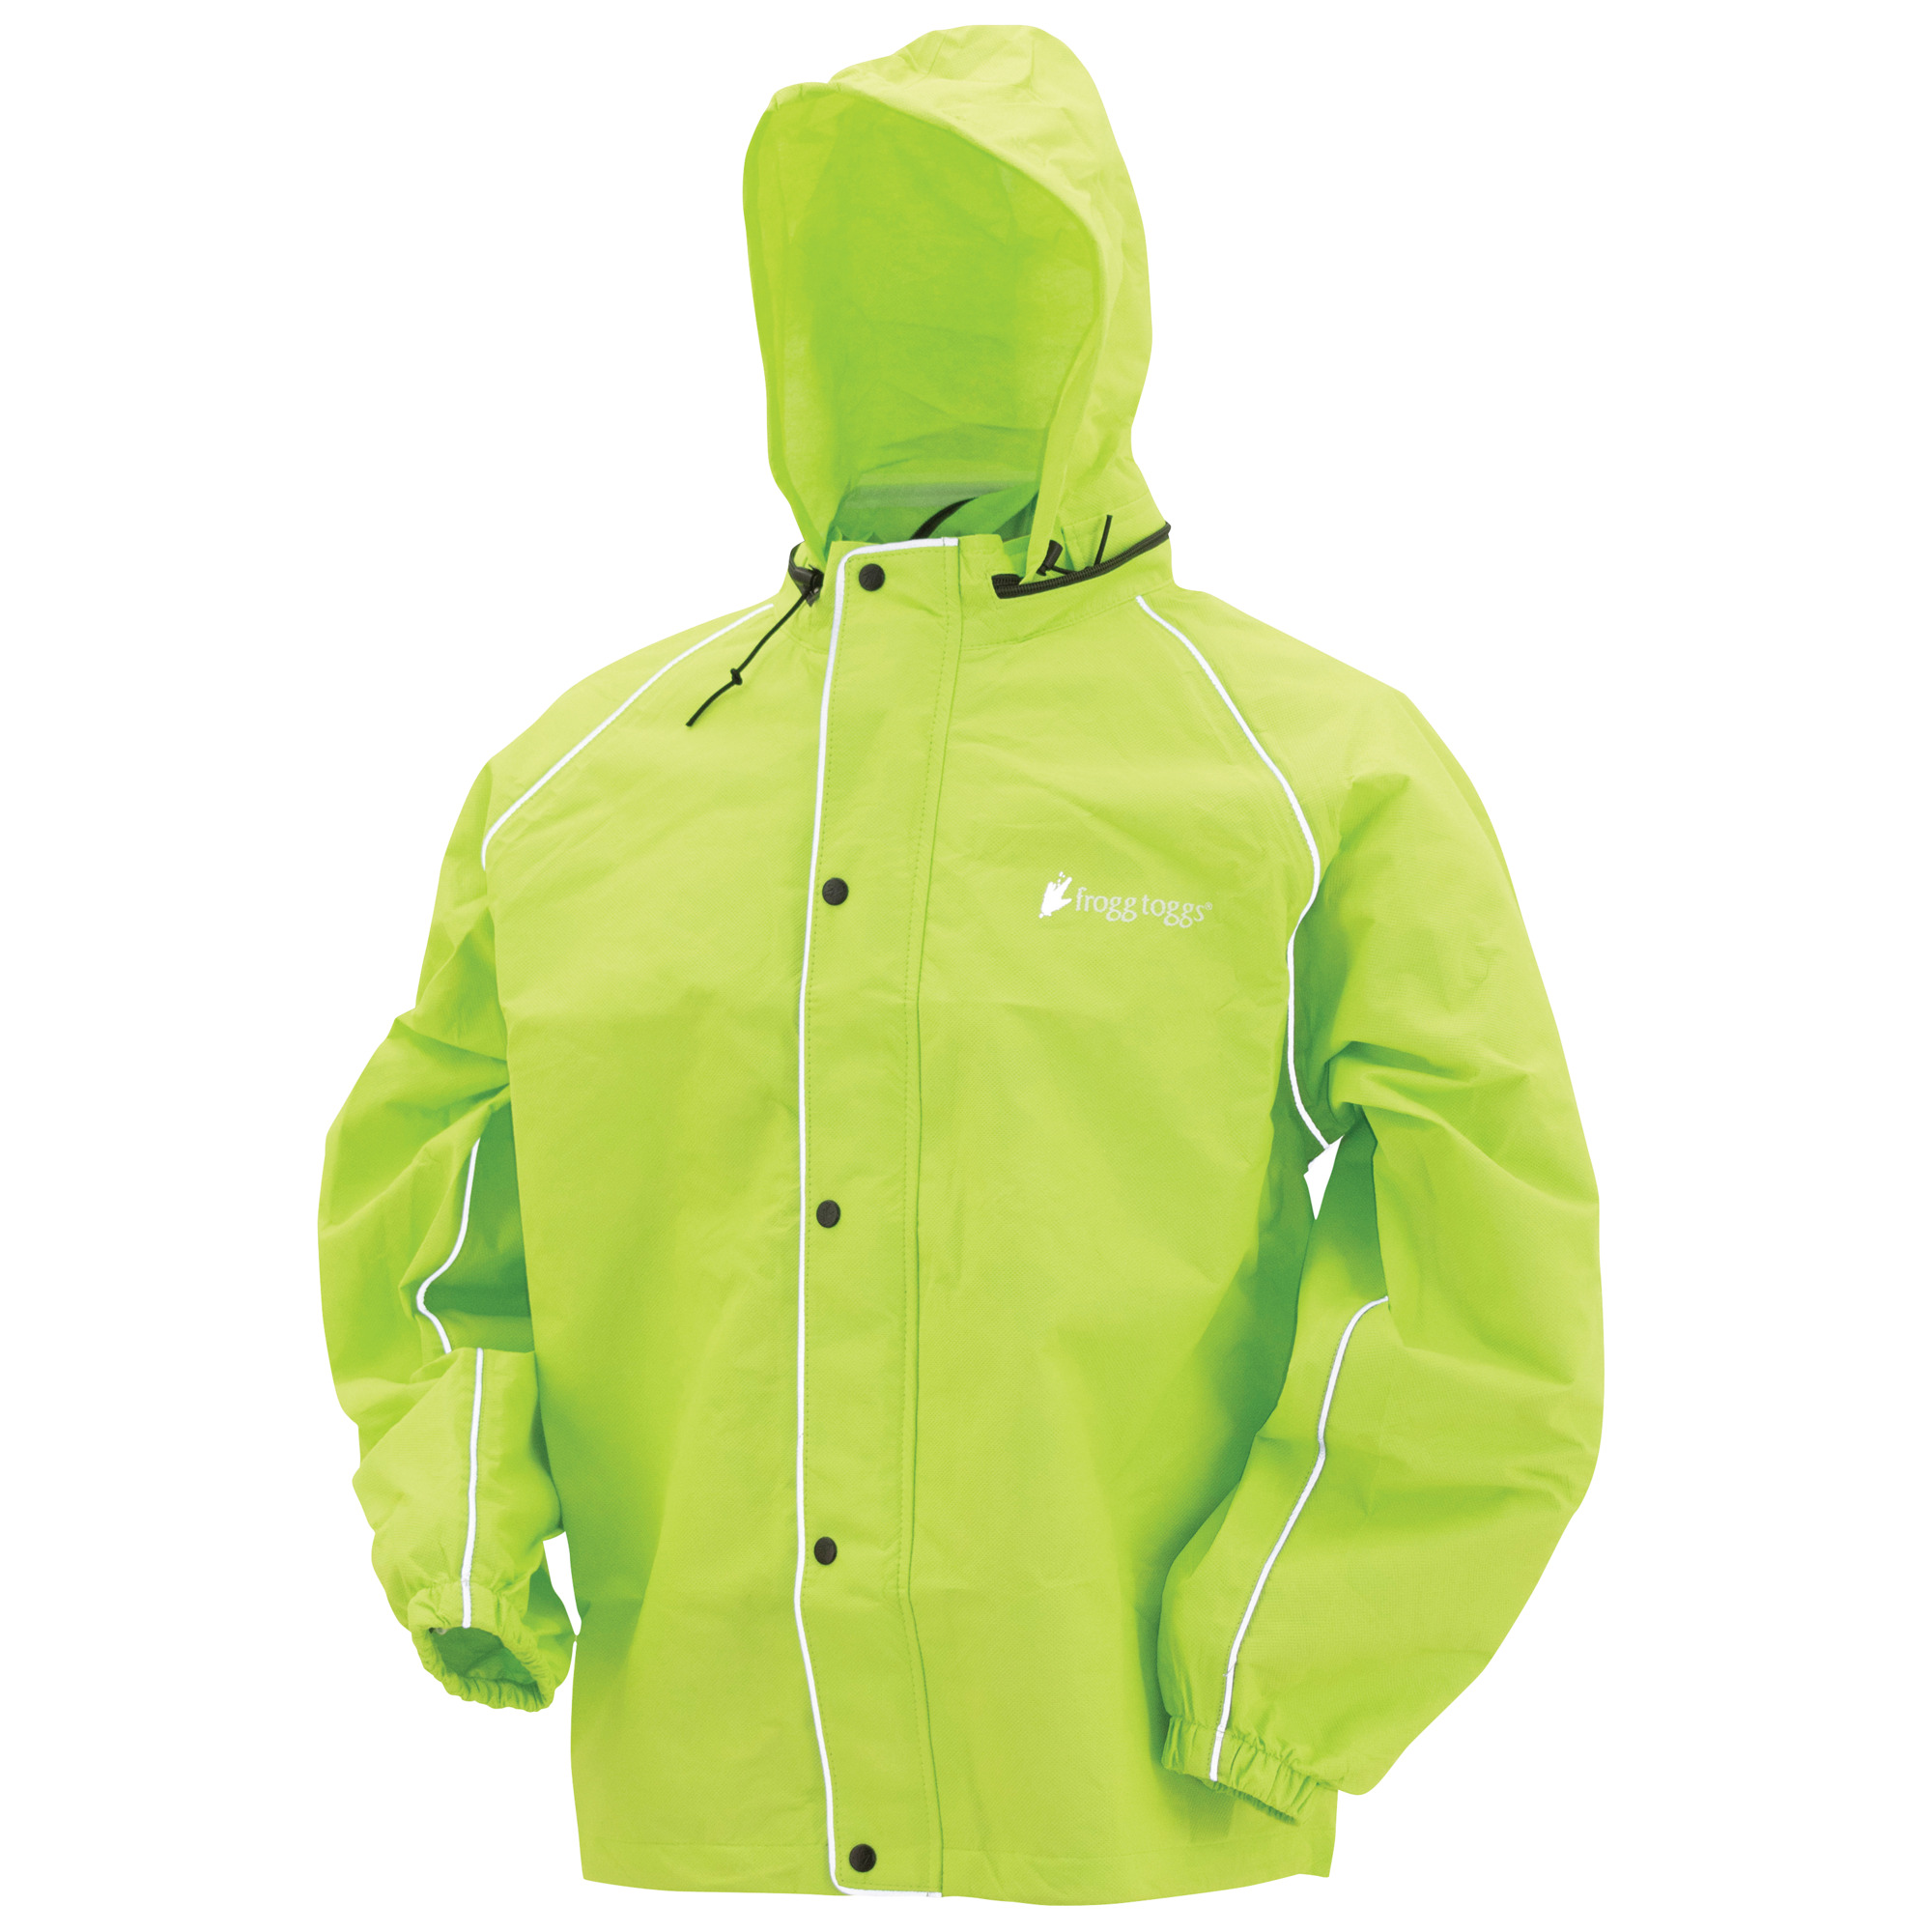 frogg toggs, Road Toad Reflective Jacket, Size XL, Color Lime with Frogg Eyzz, Model FT63133-48XL